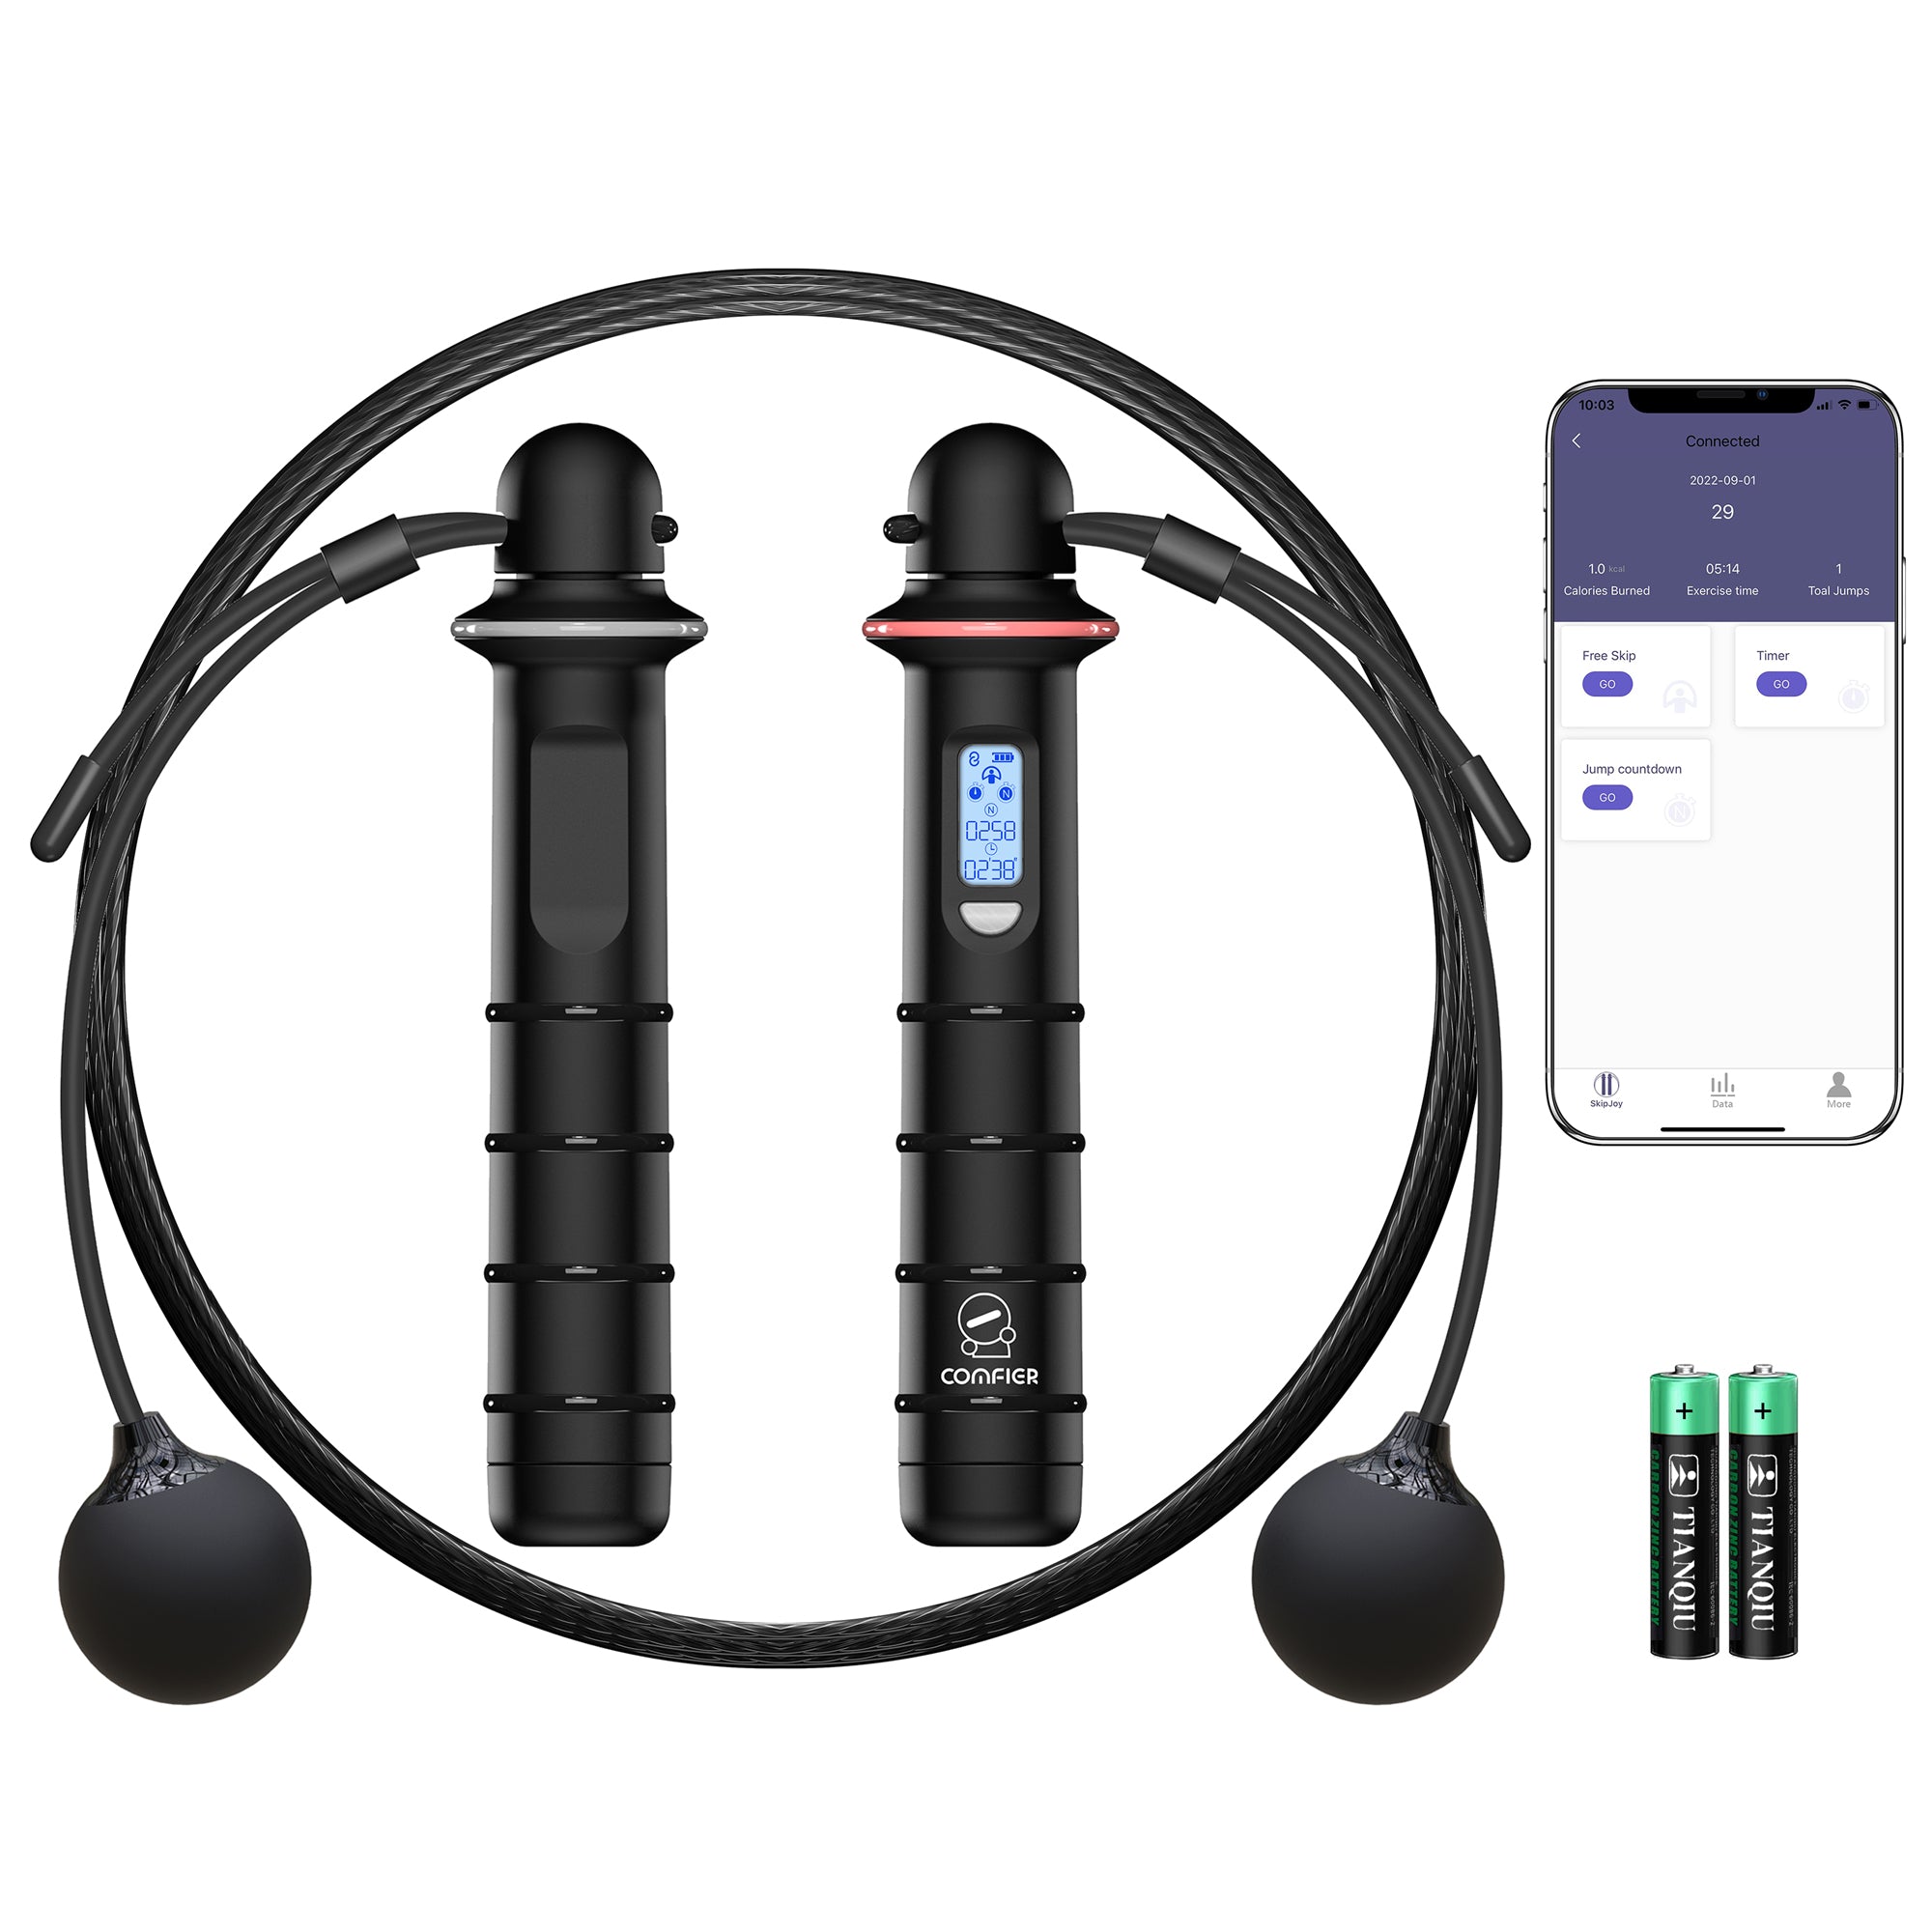 Comfier Smart Jump Rope for Fitness, Jumping Rope with APP Data Analysis --JR-2201